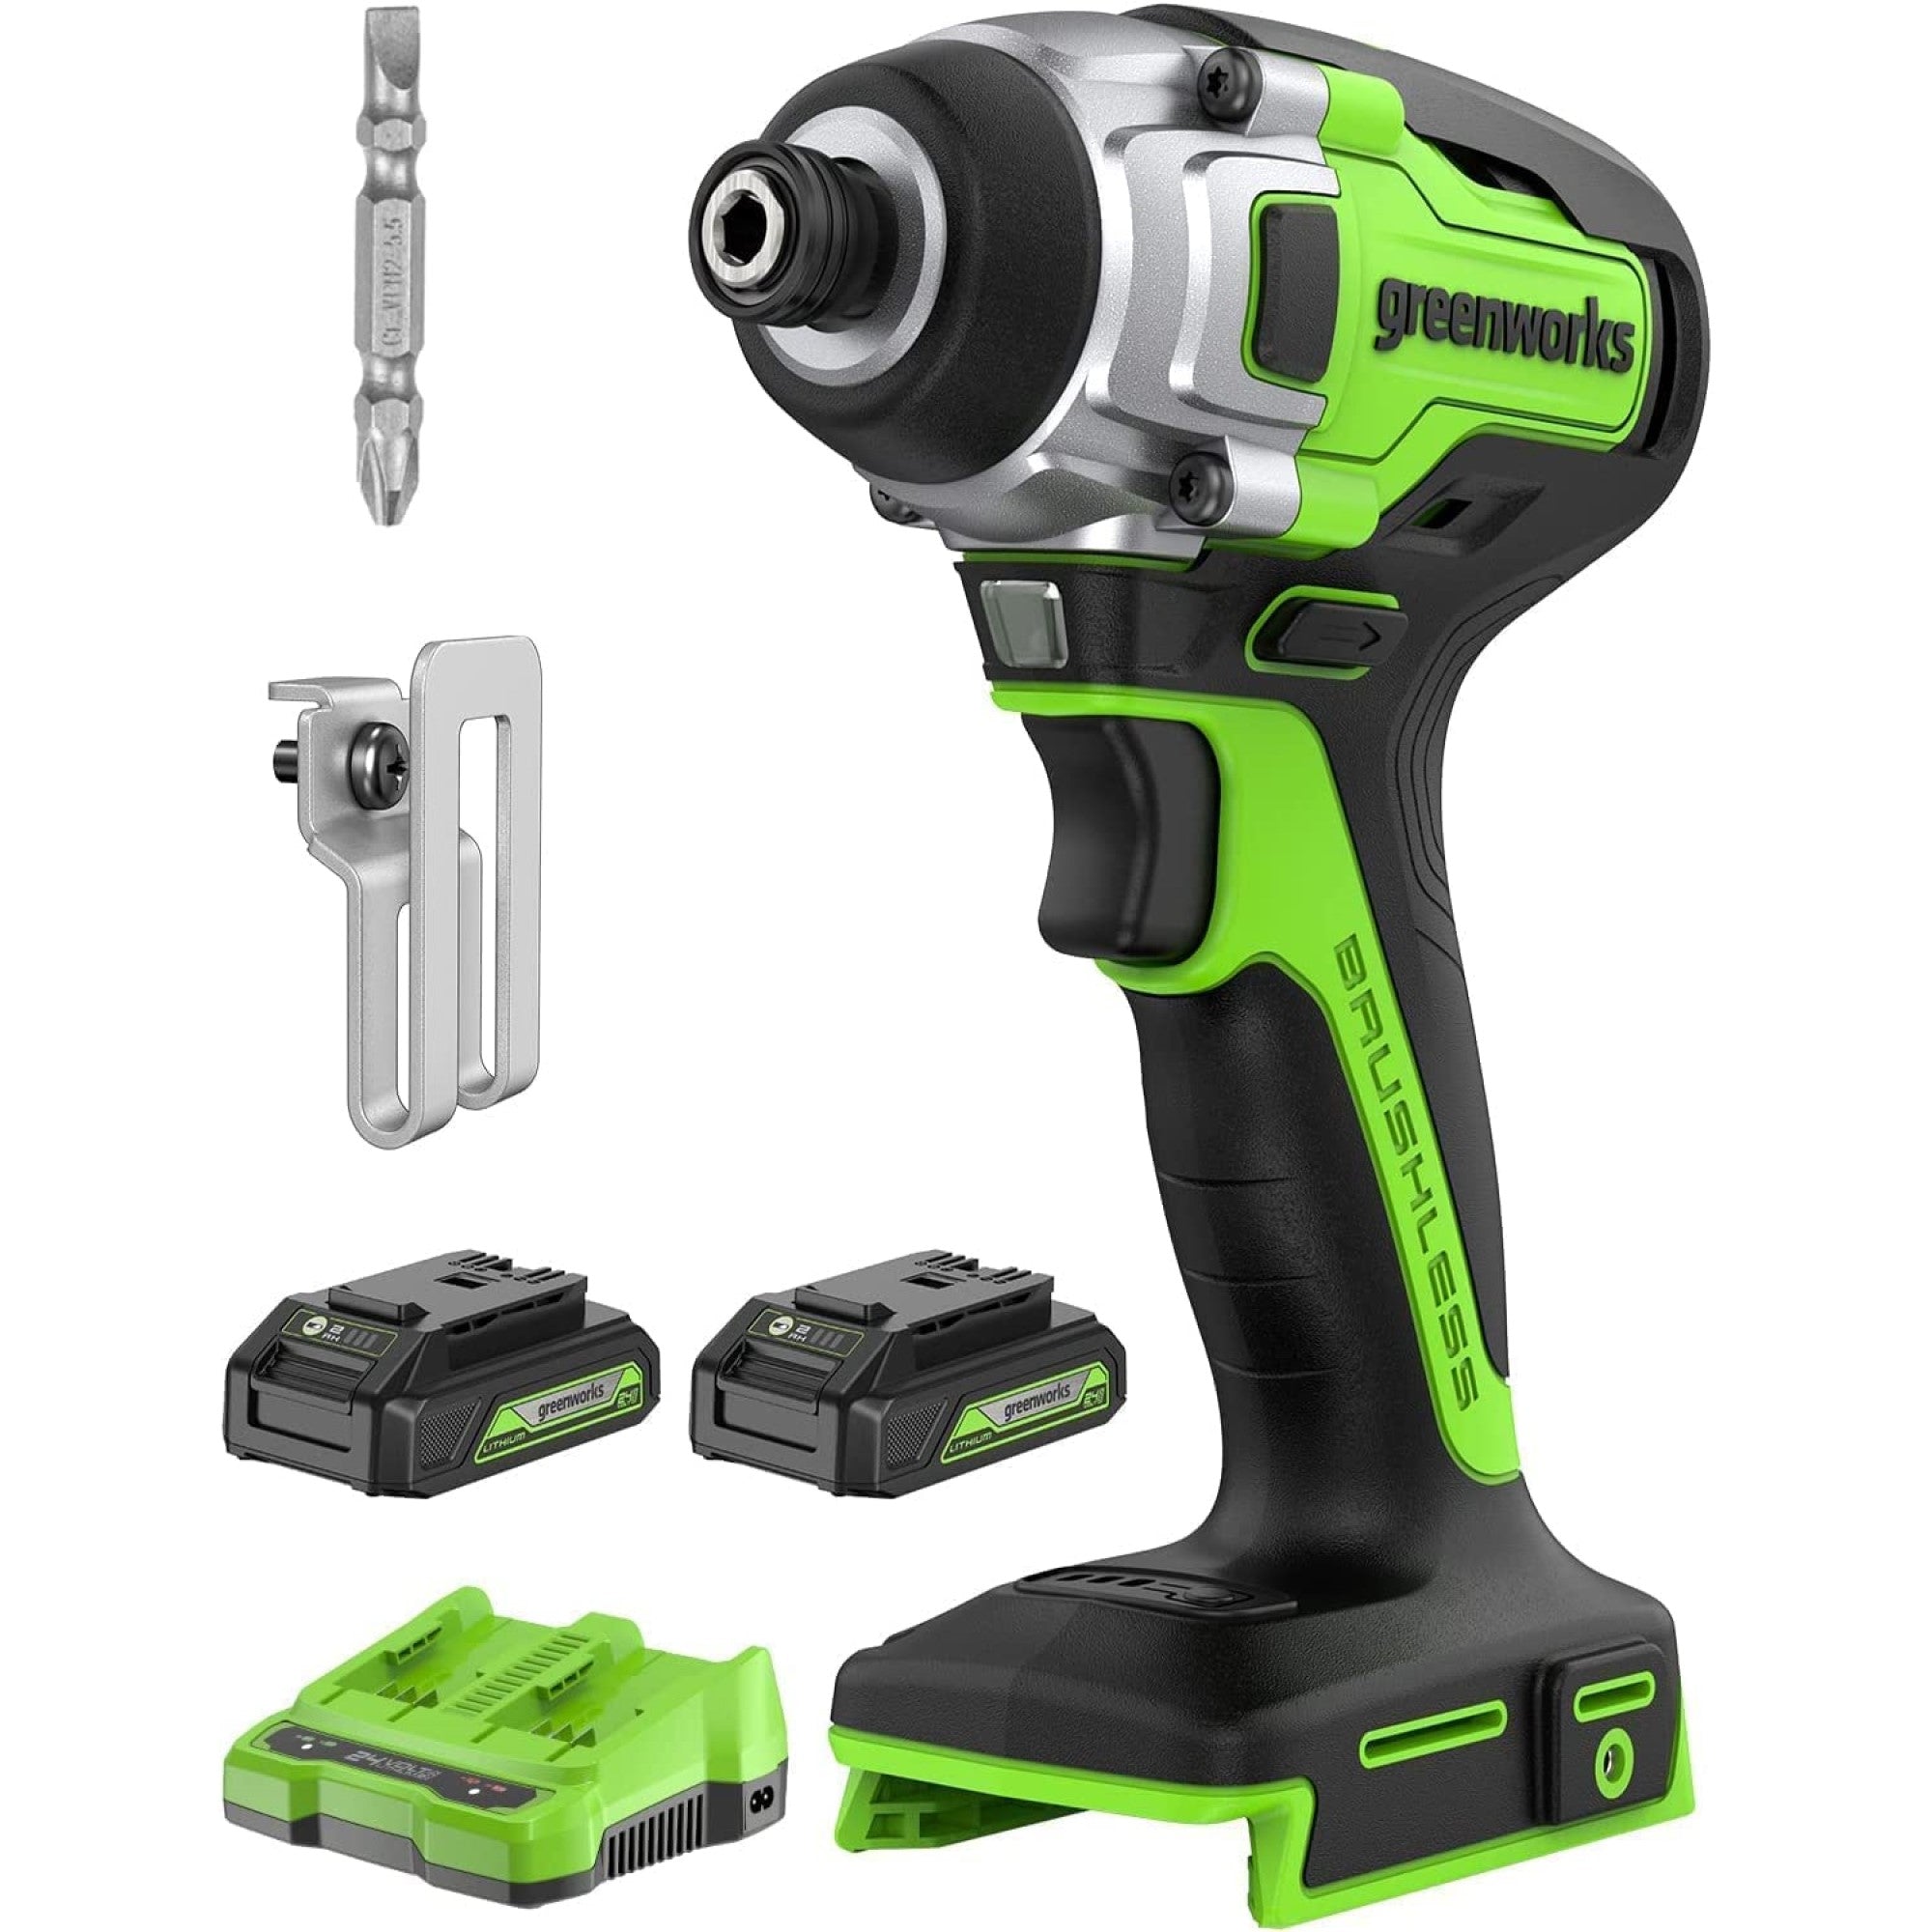 24V 1/4" 2650 in/lbs Brushless Impact Driver Kit w/ (2) 2 Ah USB Batteries, Dual Port Charger and Bits